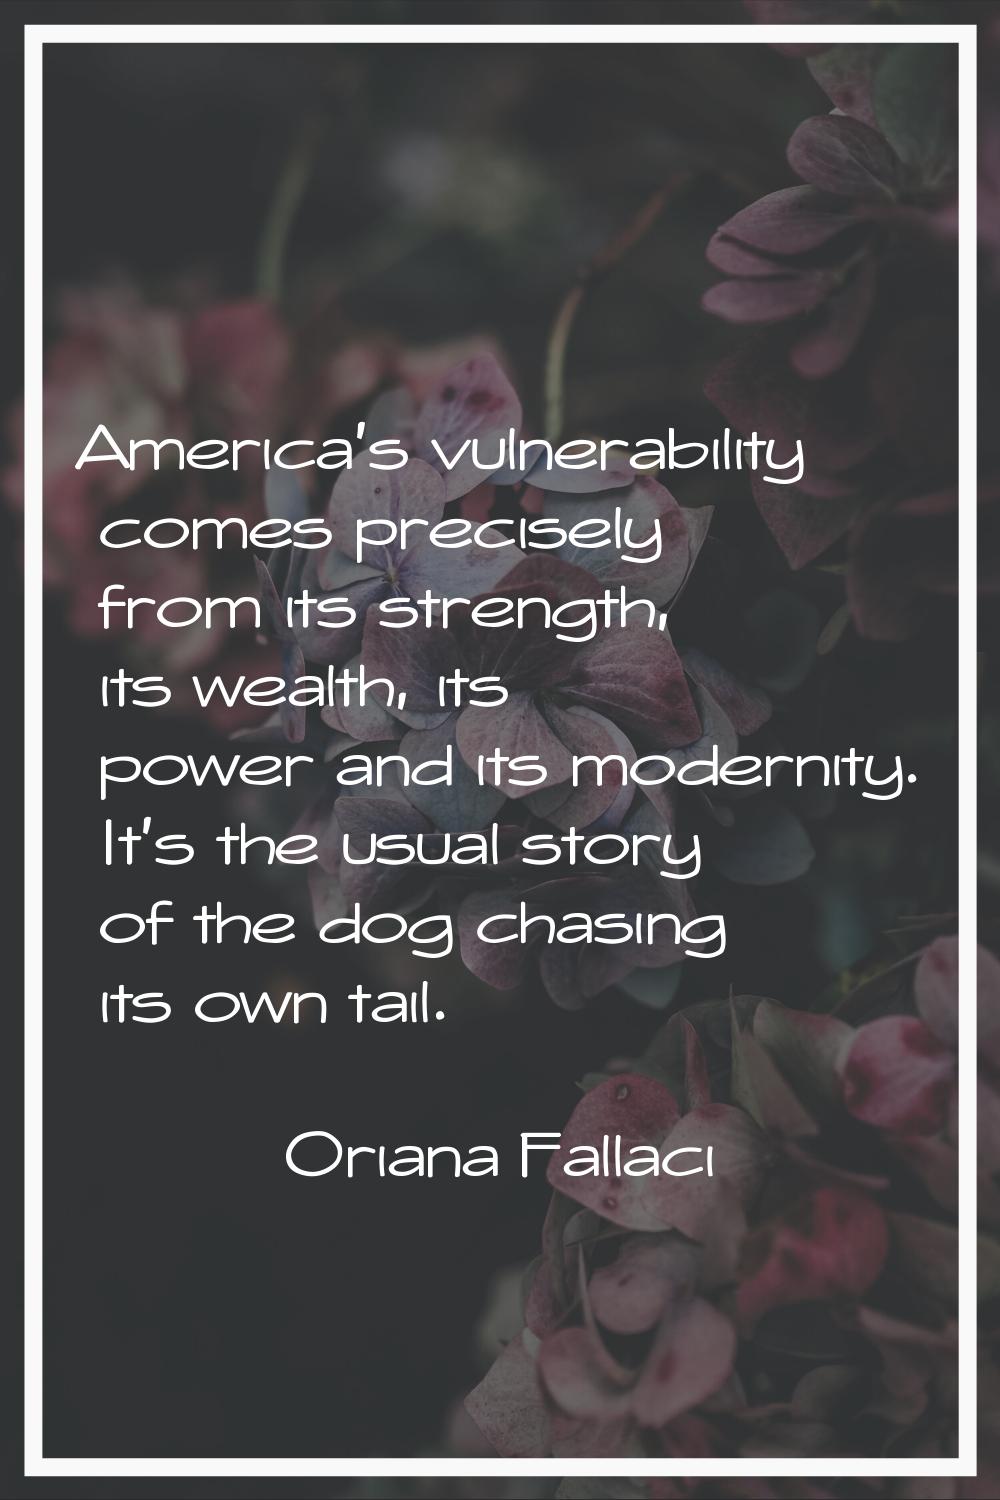 America's vulnerability comes precisely from its strength, its wealth, its power and its modernity.